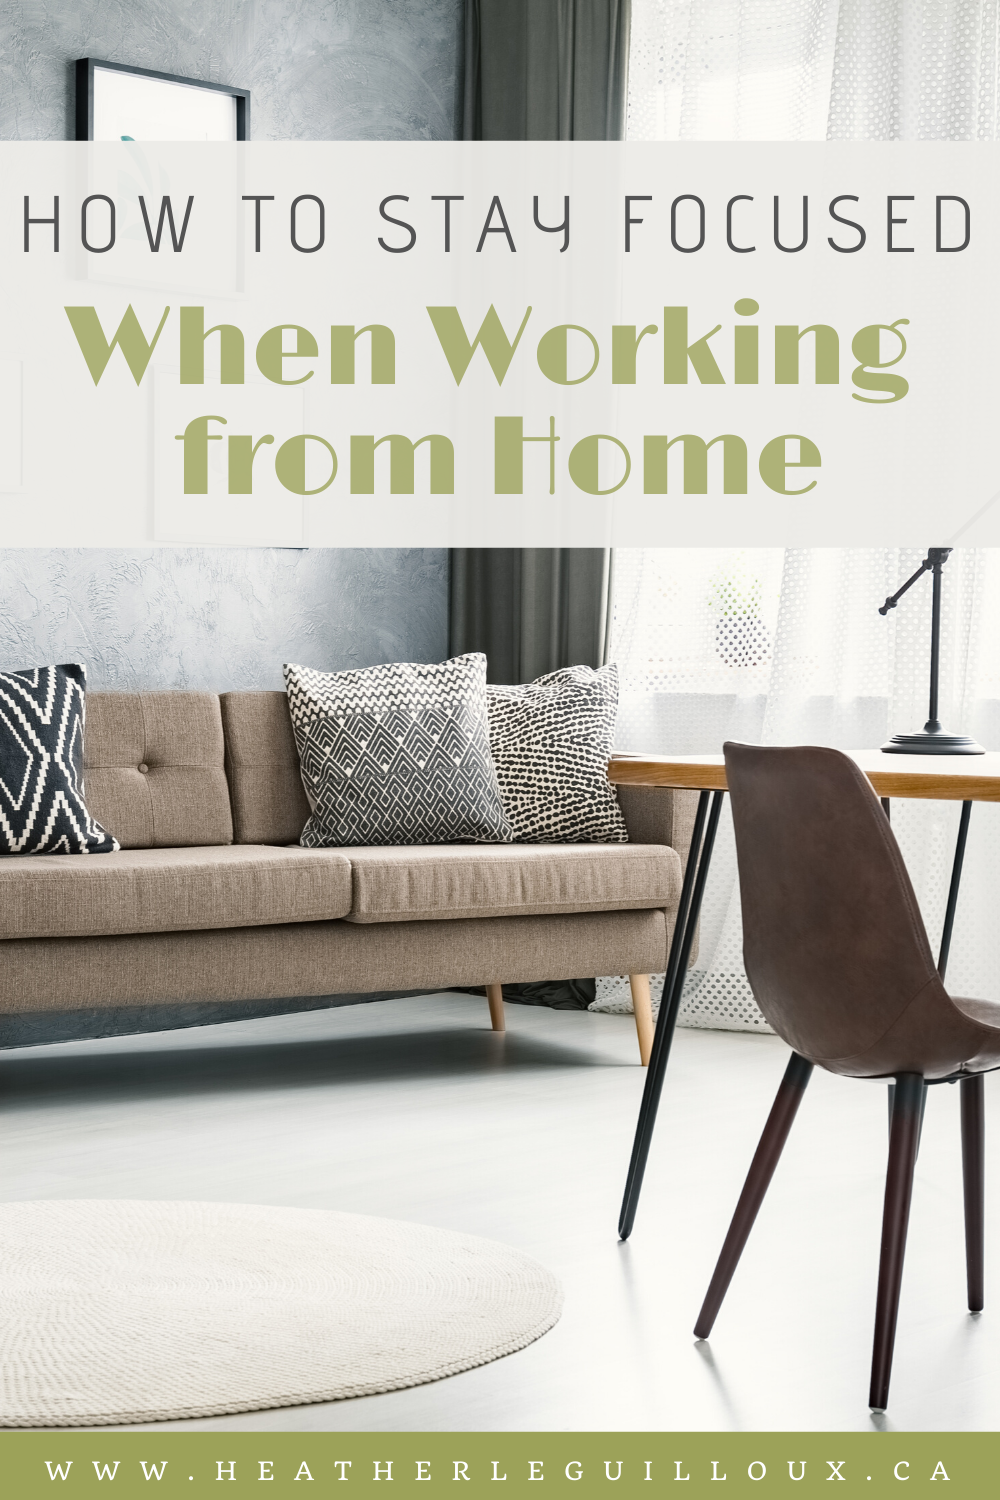 Working from home can be great--you get to spend more time with your family and work comfortably from your favorite spot in the house. However, it can be challenging to keep the productivity level at a maximum, if you don’t create an efficient work routine. Let's explore a few options you have of staying focused and present while working from home. #workathome #focused #present #guestarticle